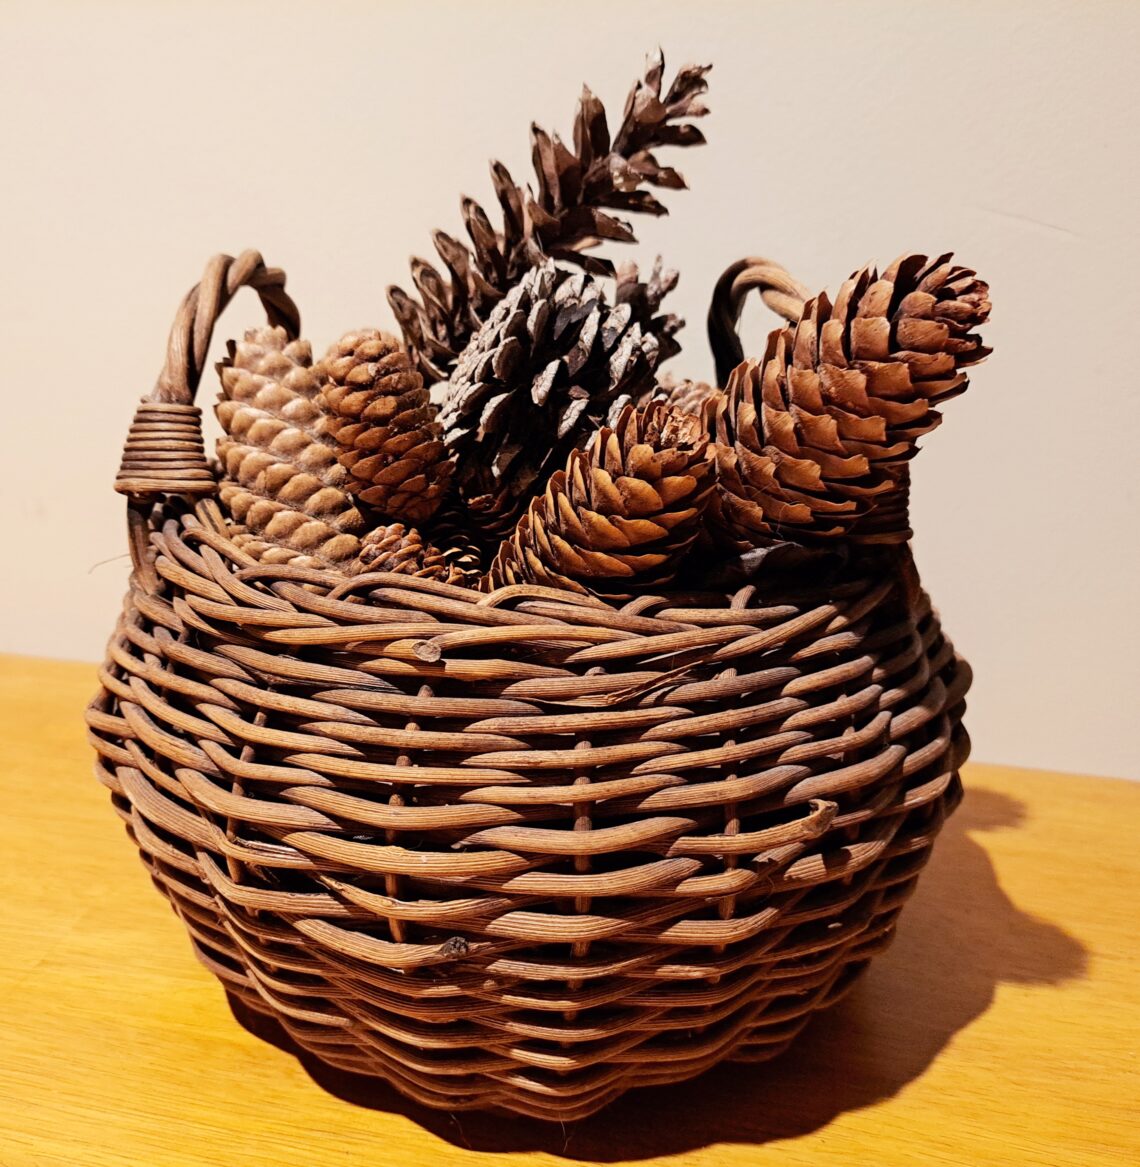 Willow and grape vine are some of the most popular basket making supplies to forage!